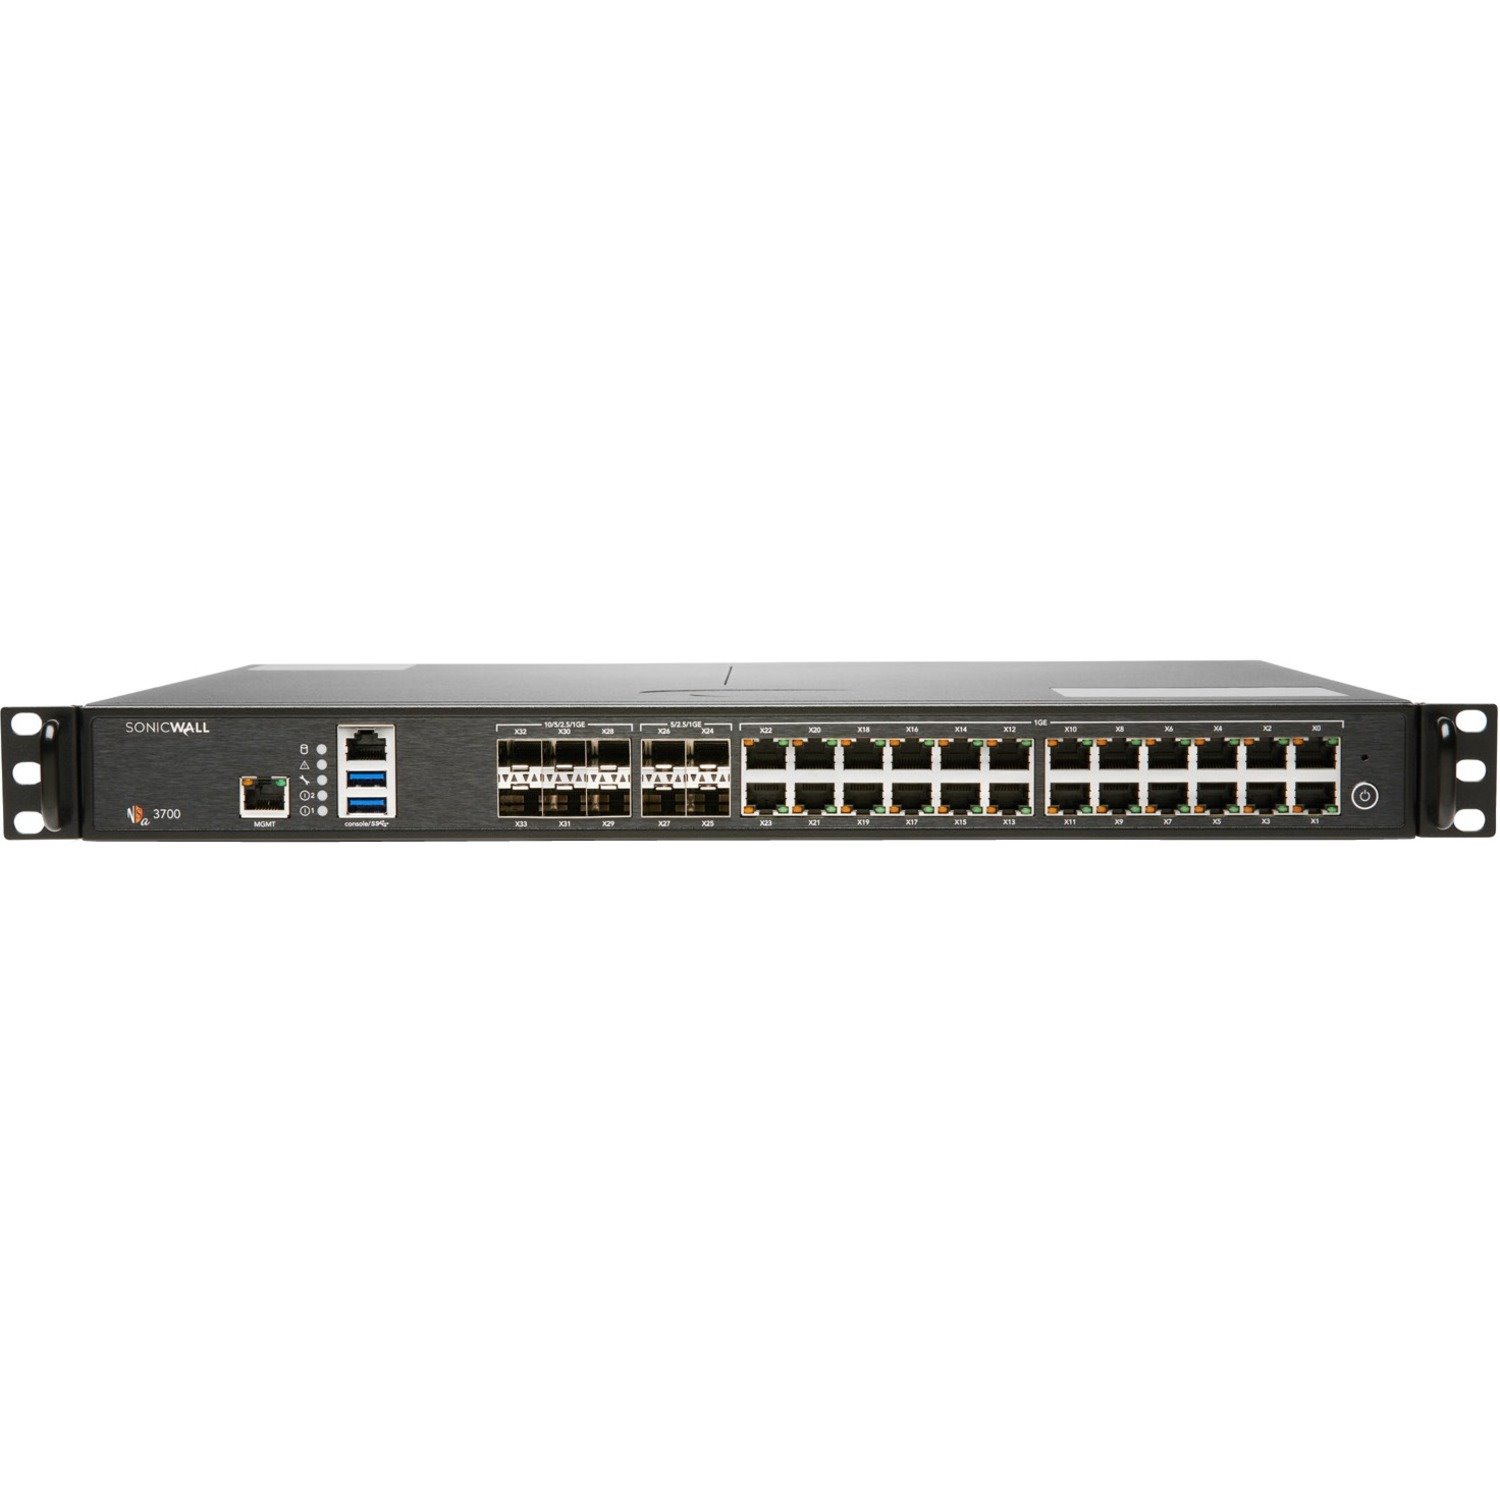 SonicWall 3700 Network Security/Firewall Appliance - 2 Year Secure Upgrade Plus Advanced Edition